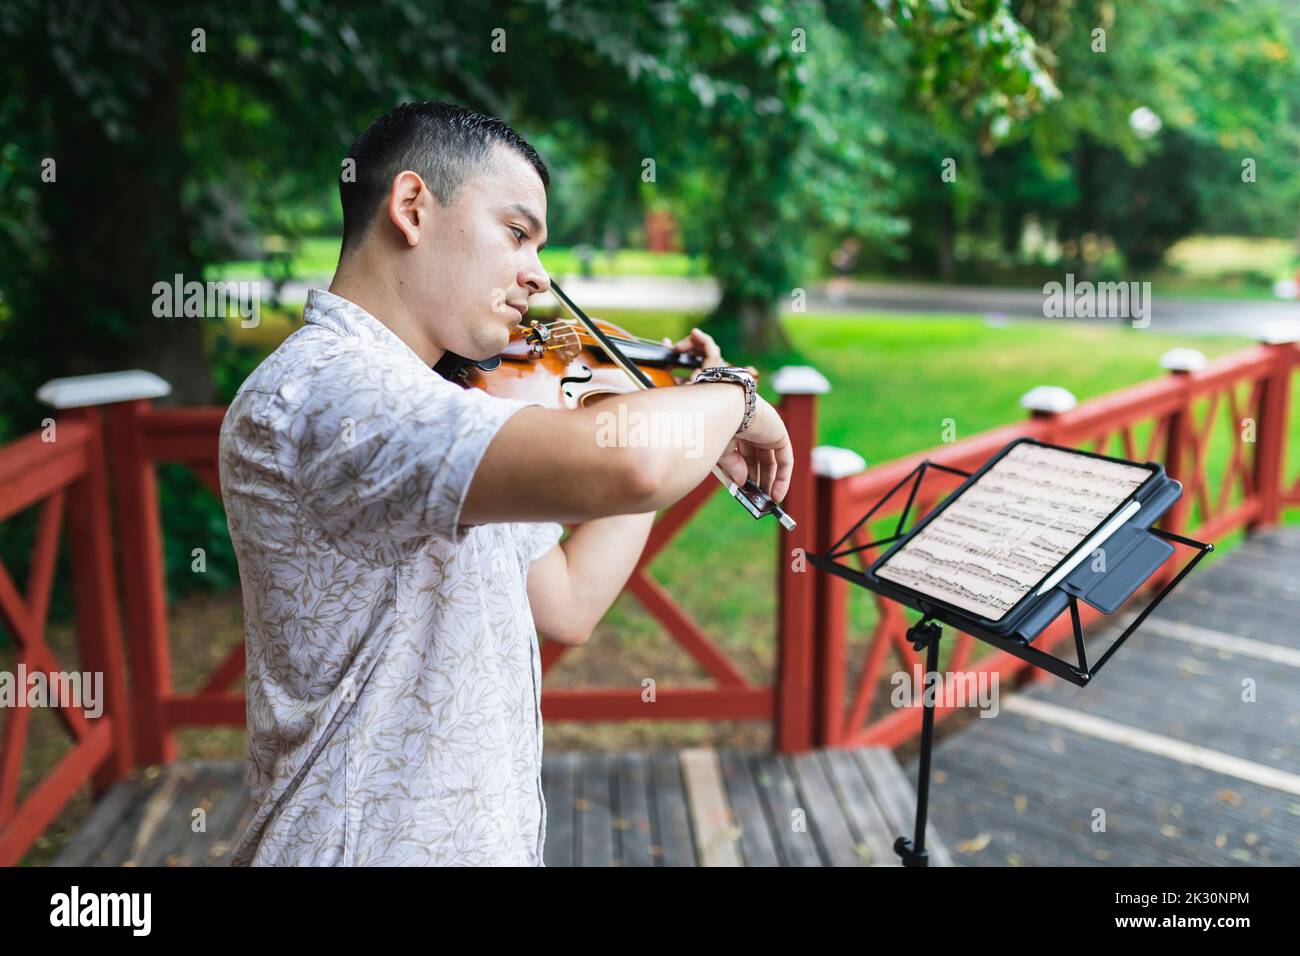 Violinist playing violin looking at sheet music in park Stock Photo